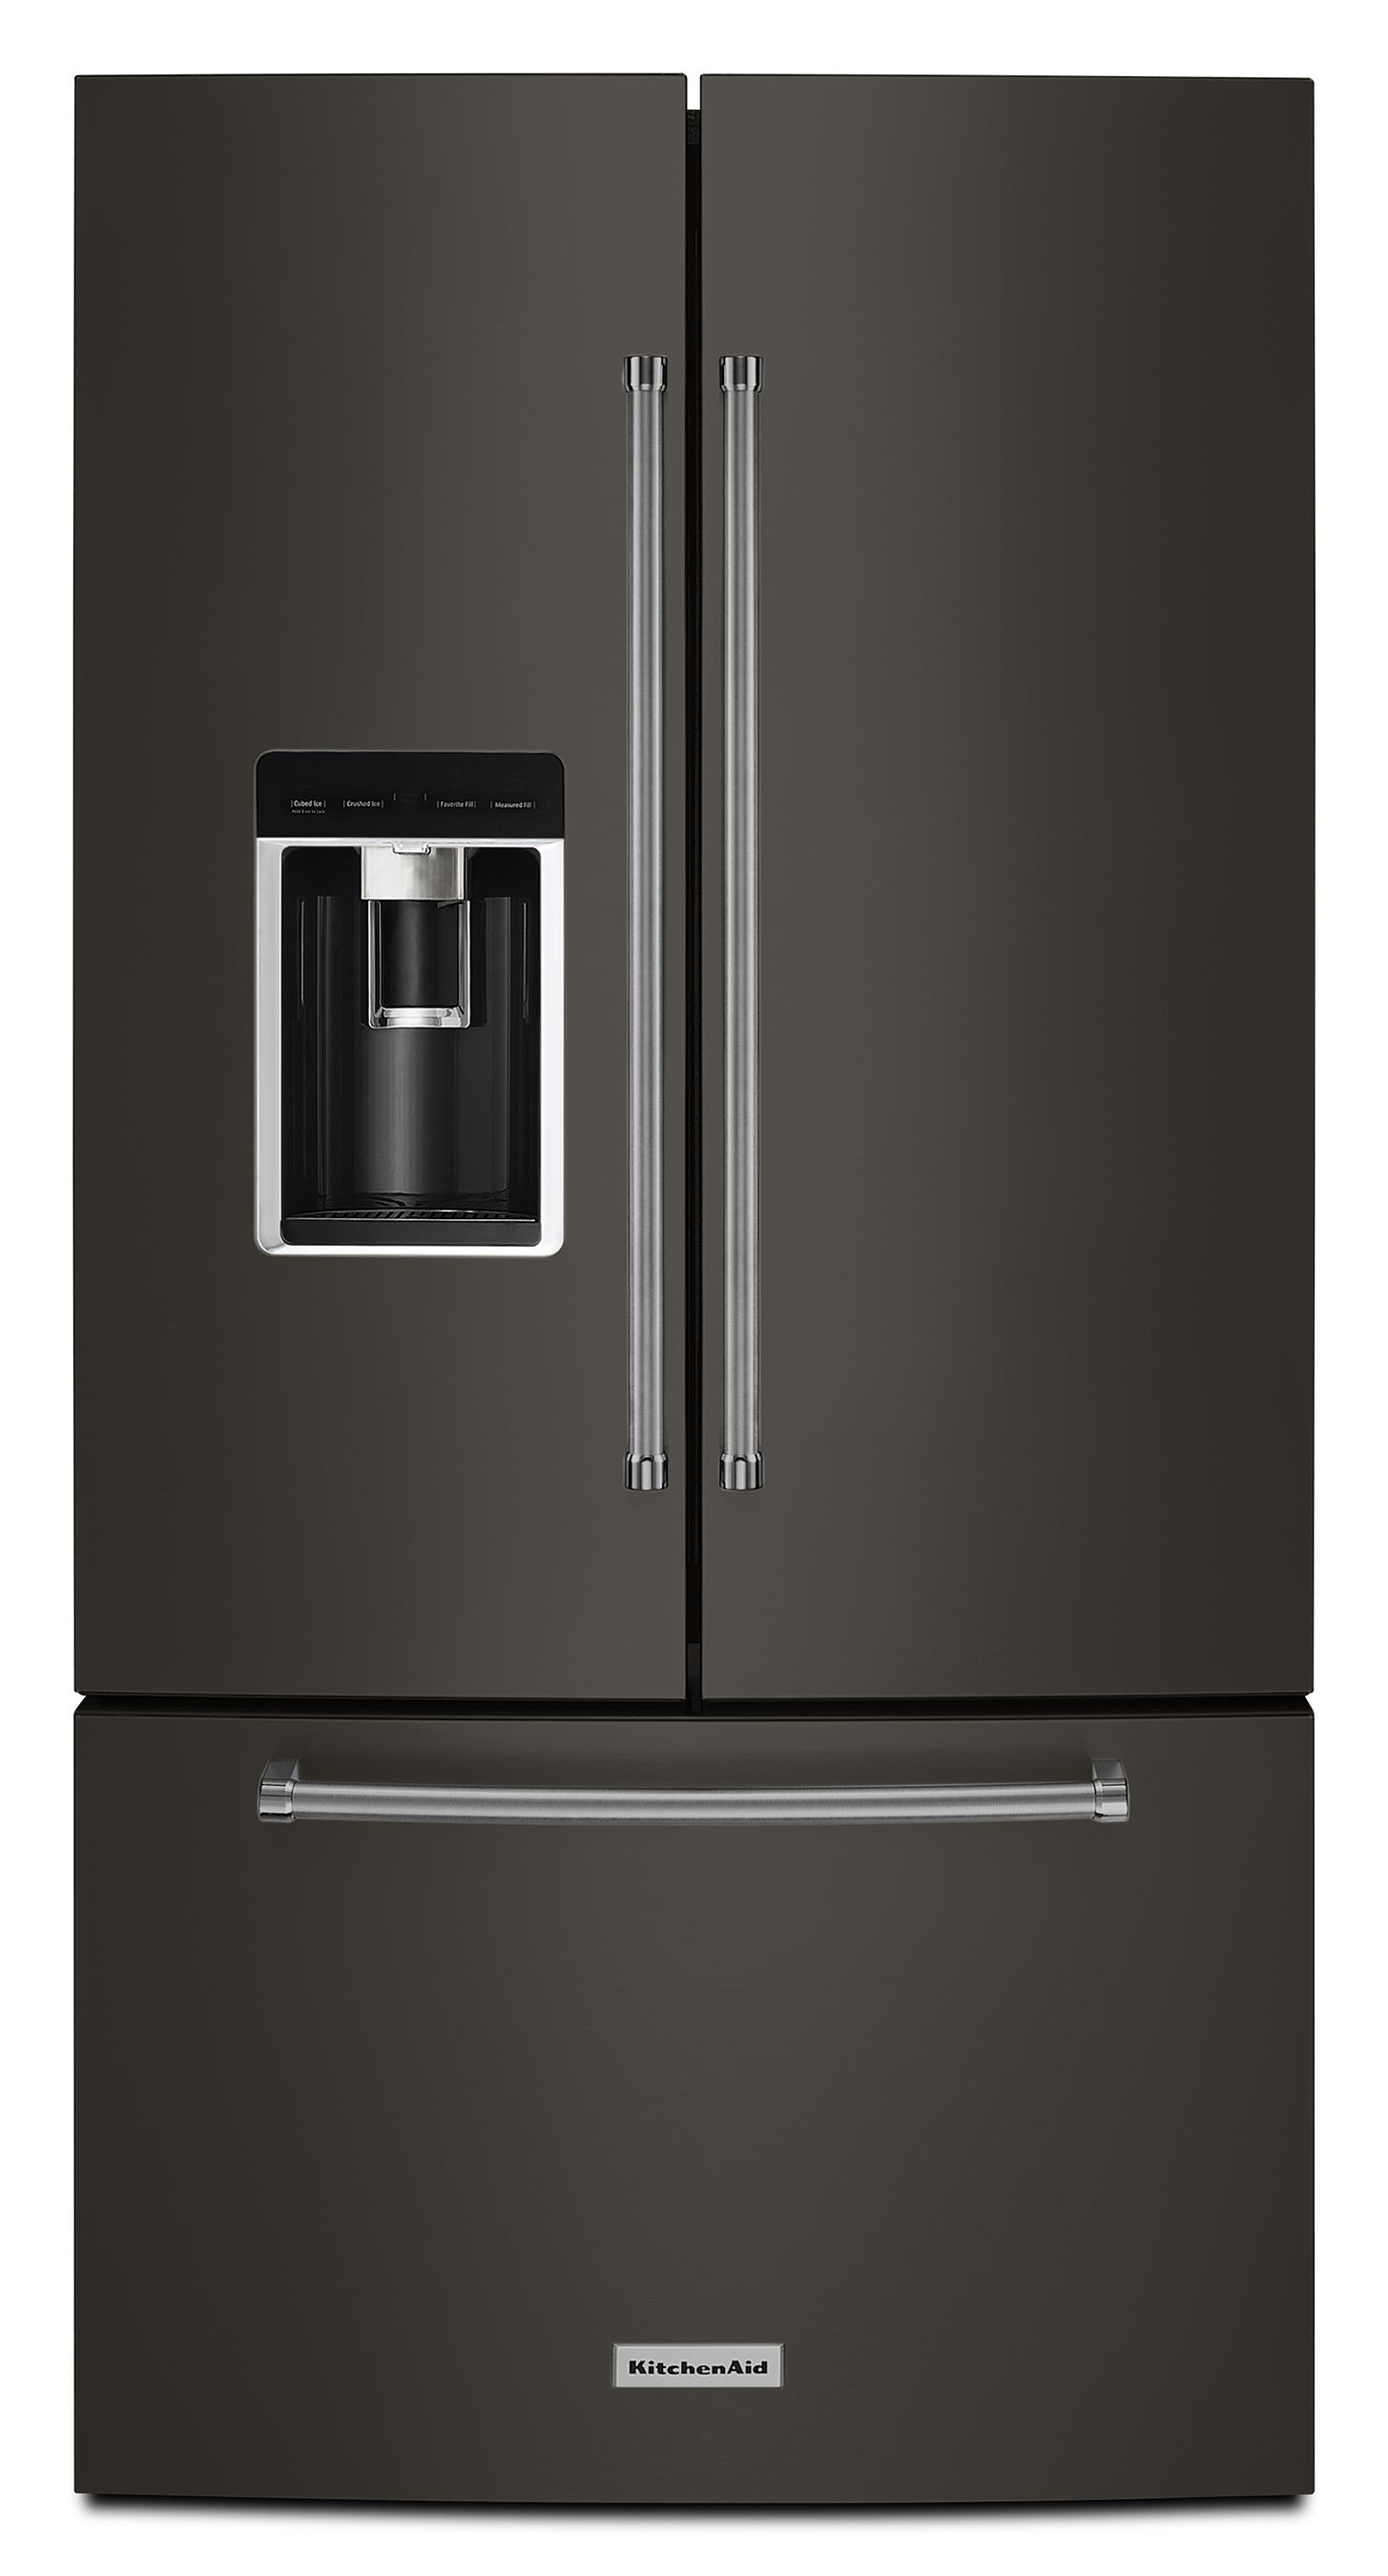 The new models are offered in the brand’s industry-first black stainless steel finish